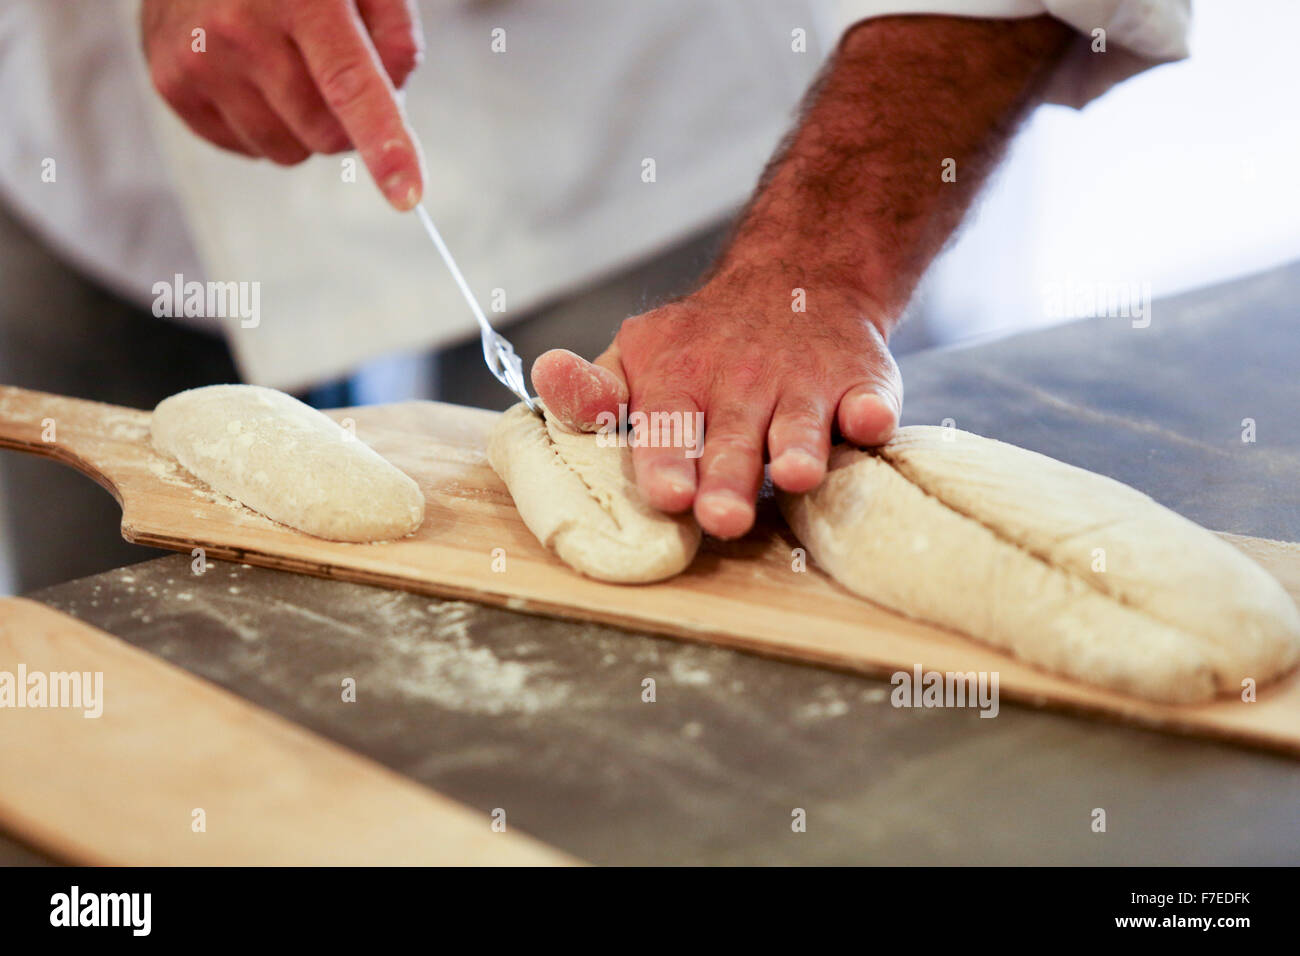 The shaped loaves are allowed to leaven before baking, Photographed at a boutique bakery Stock Photo